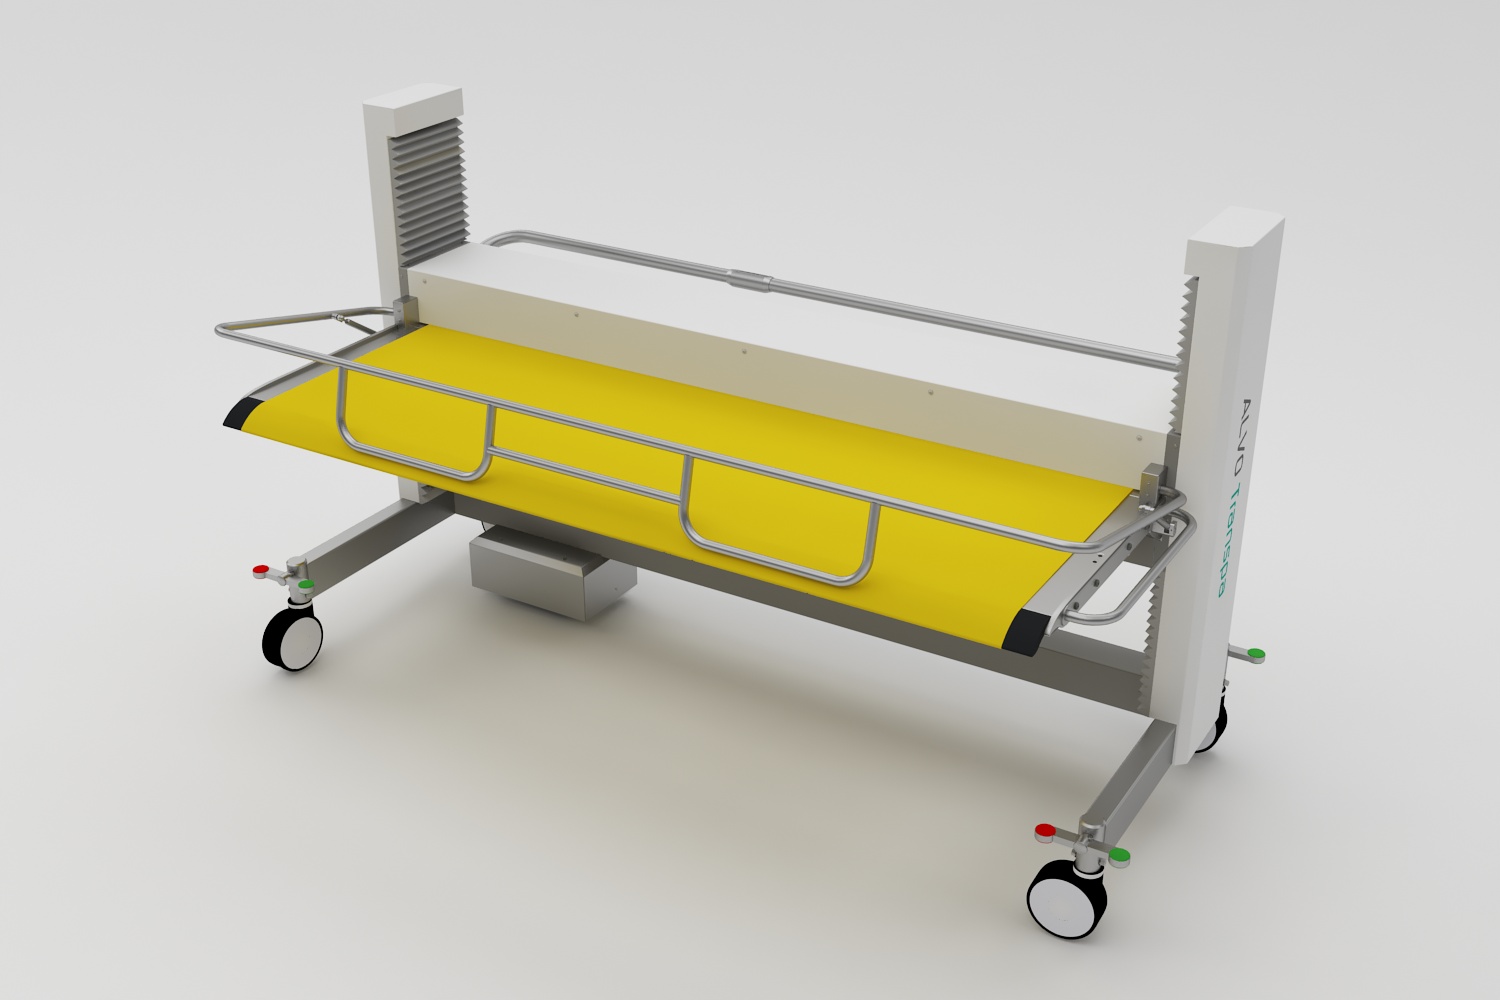 Mobile patient transfer system